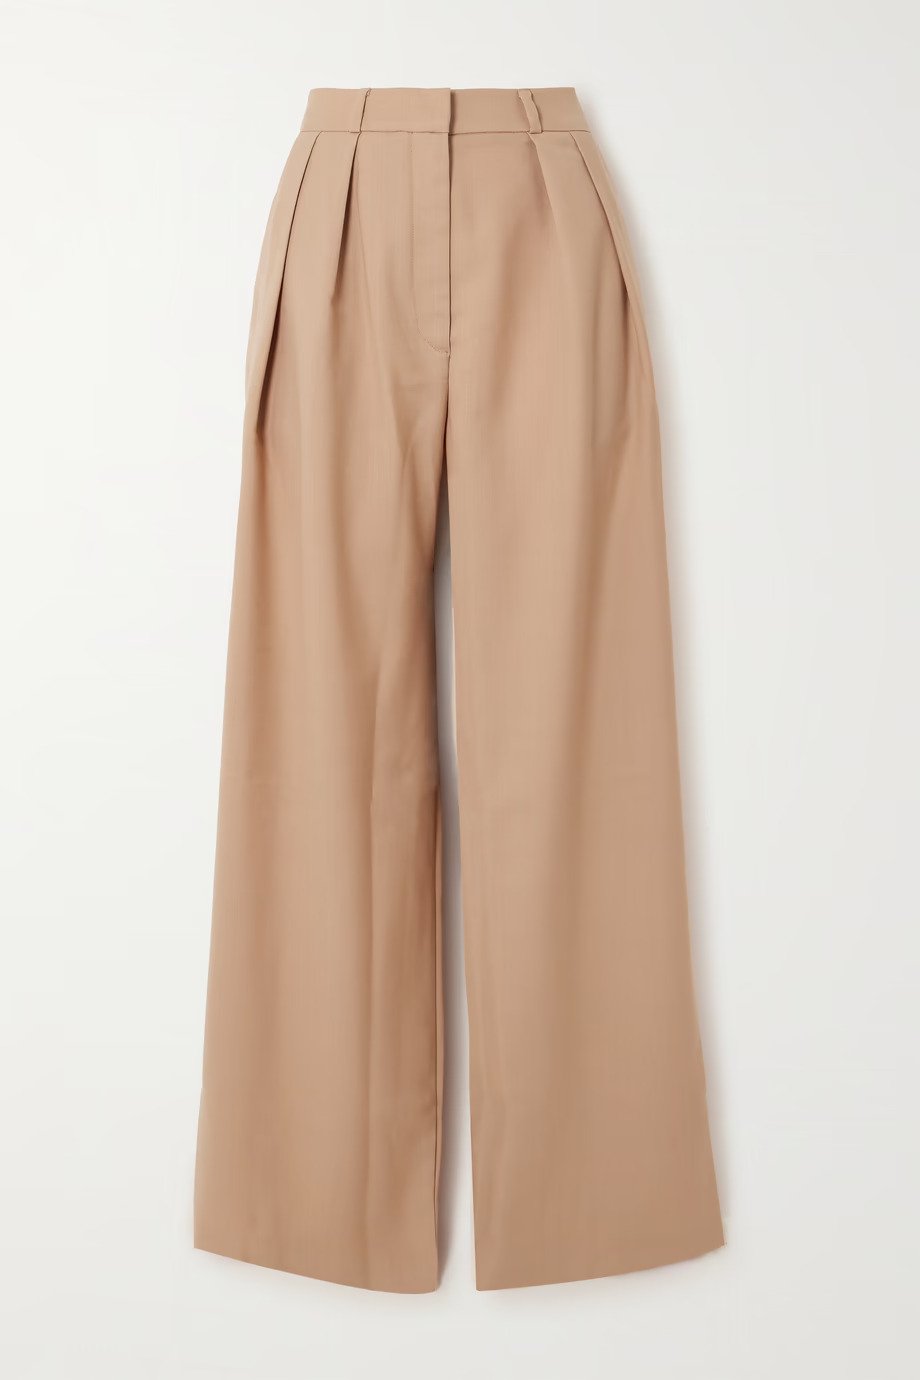 The Frankie Shop + Tansy Pleated Twill Wide-Leg Pants